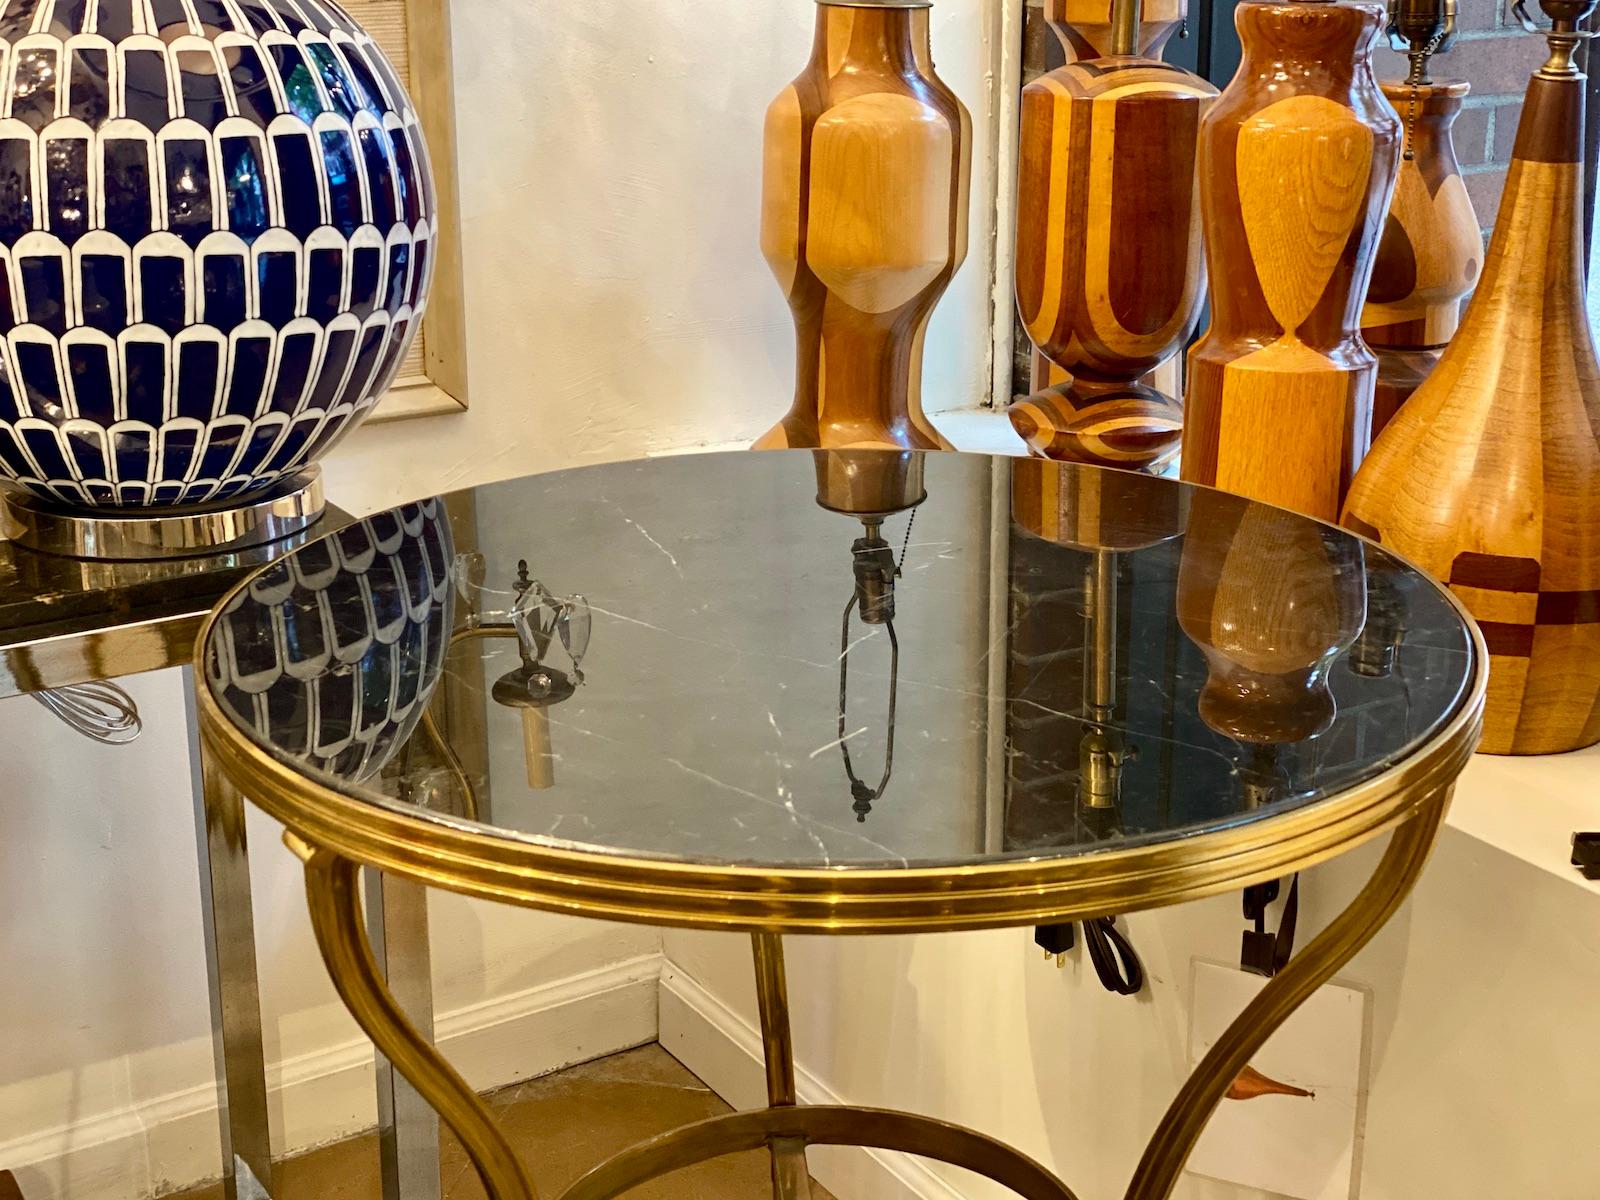 A pair of circa 1950's French polished bronze neoclassic side tables with polished black marble.

Measurements:
Height: 30